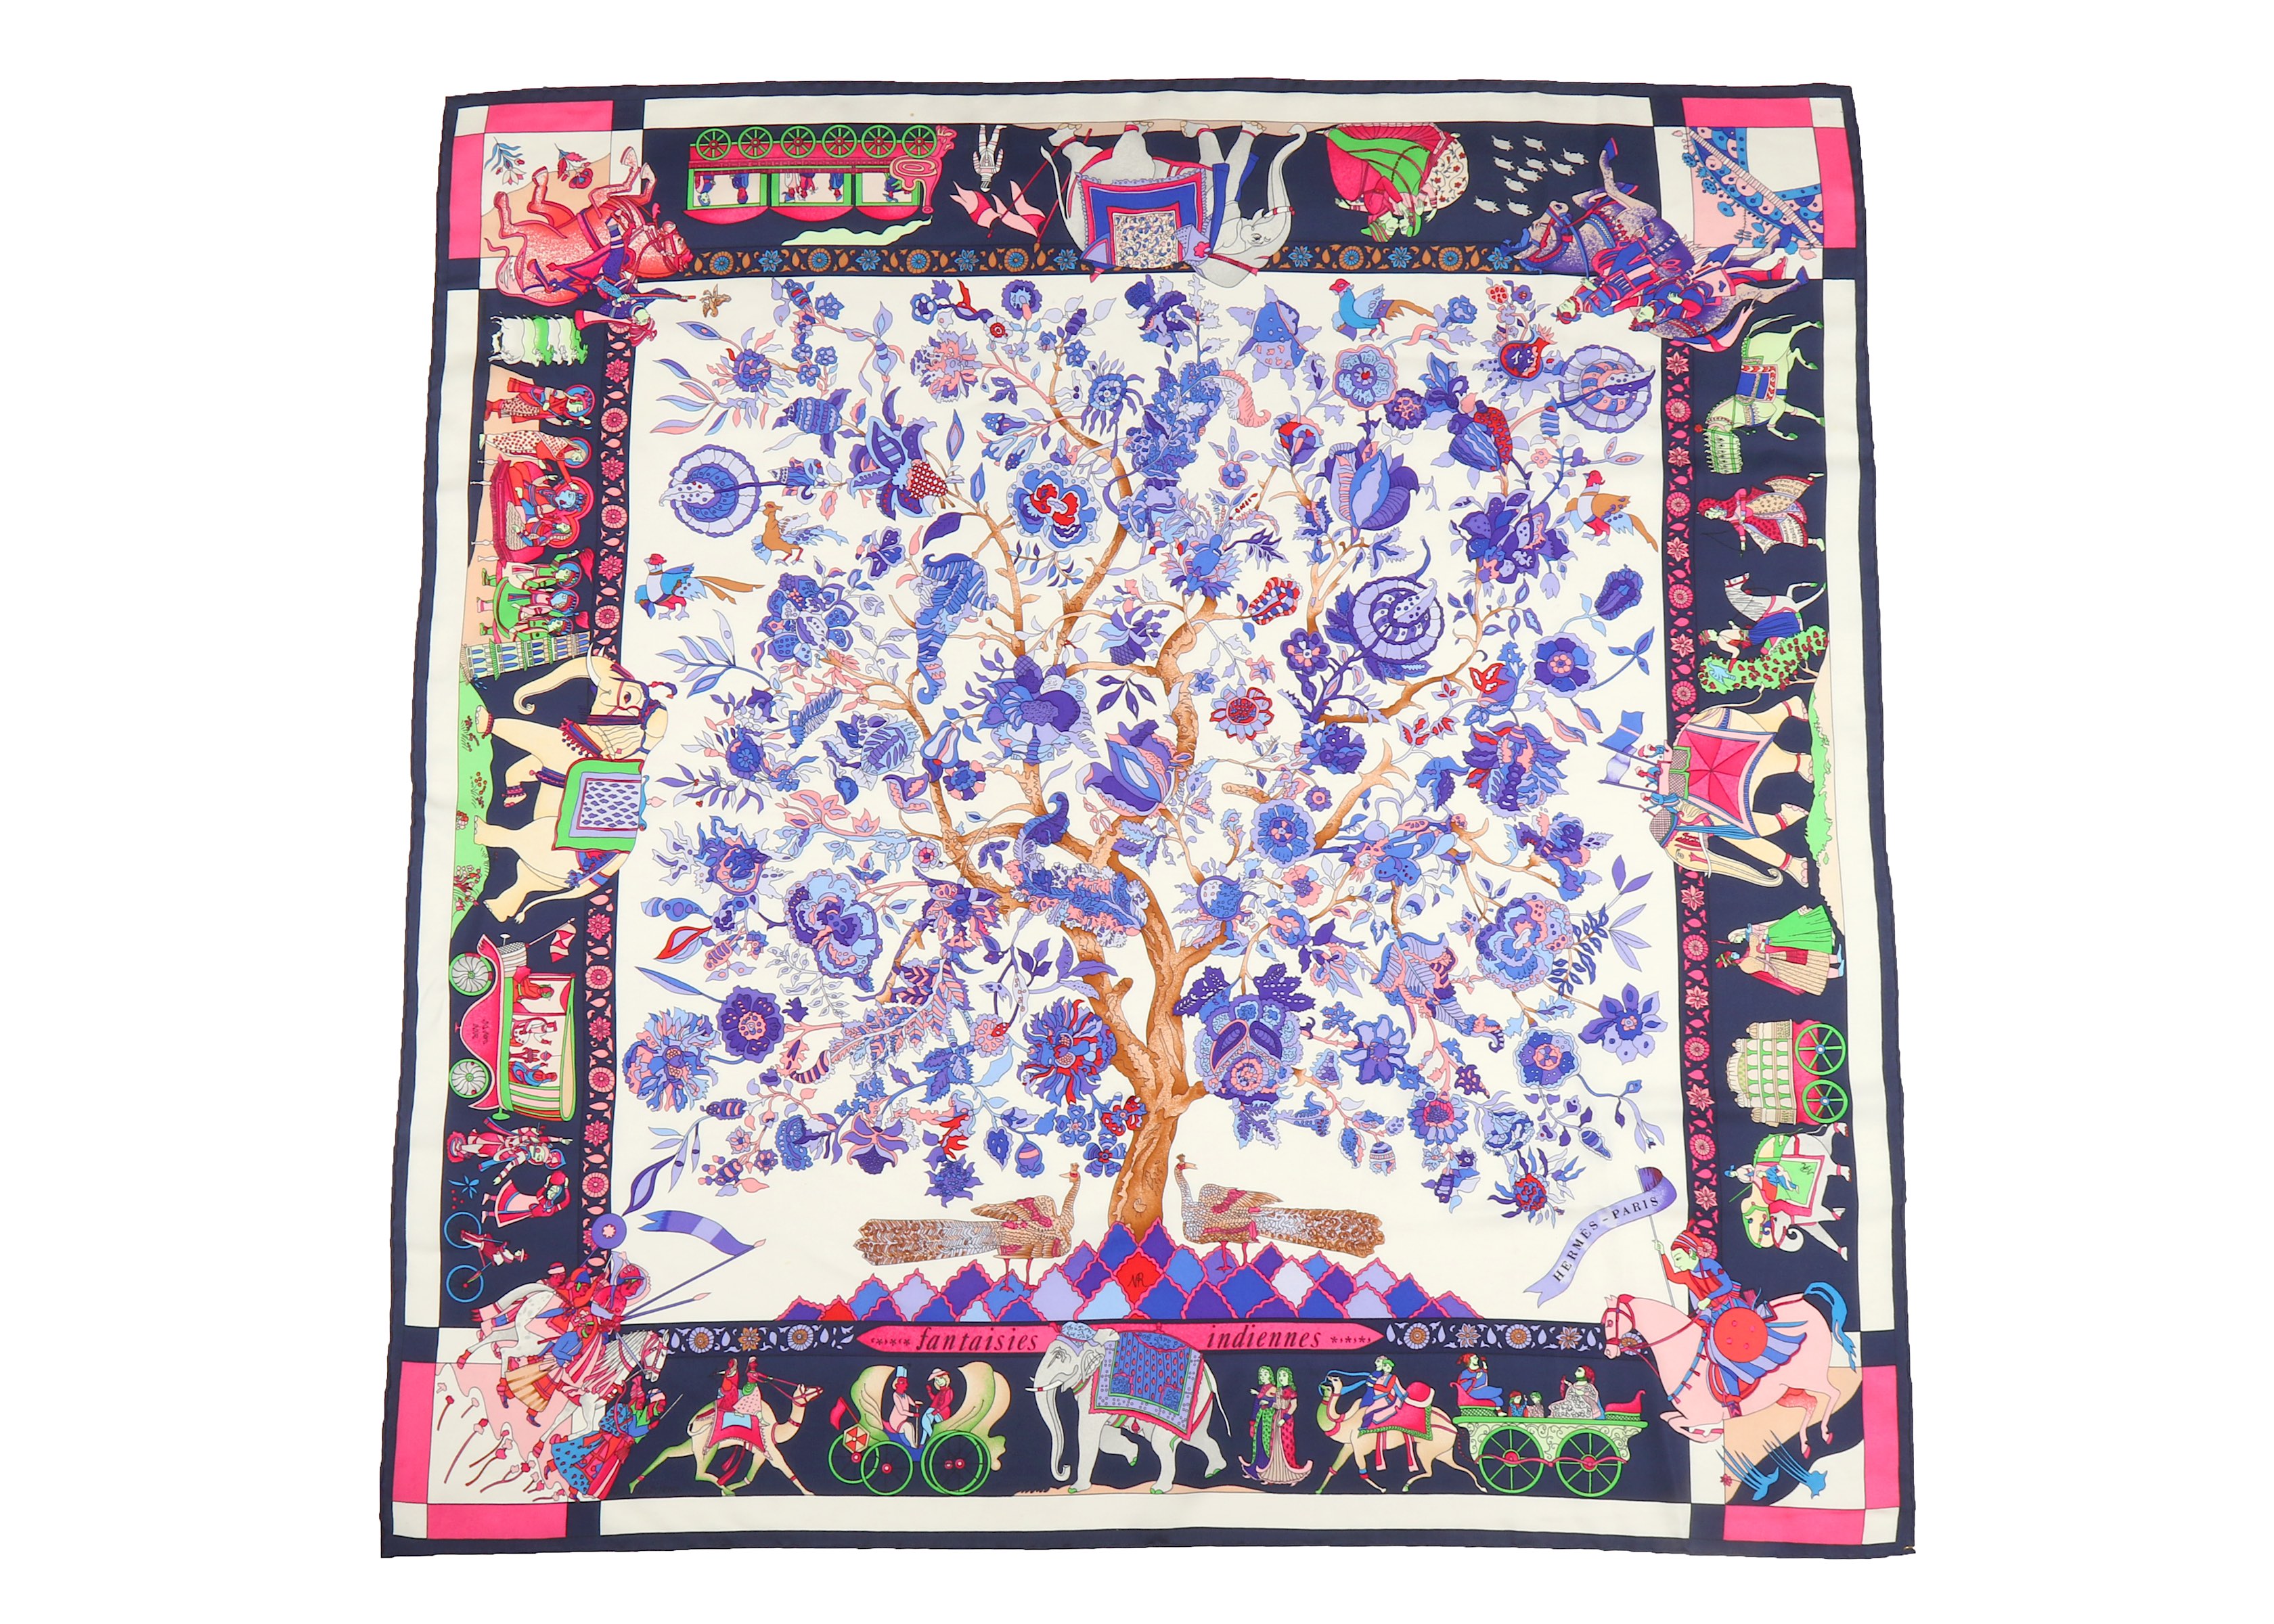 Hermes 'Fantaisies Indiennes' Silk Scarf, designed in 1987 by Loic Dubigeon, indigo border on